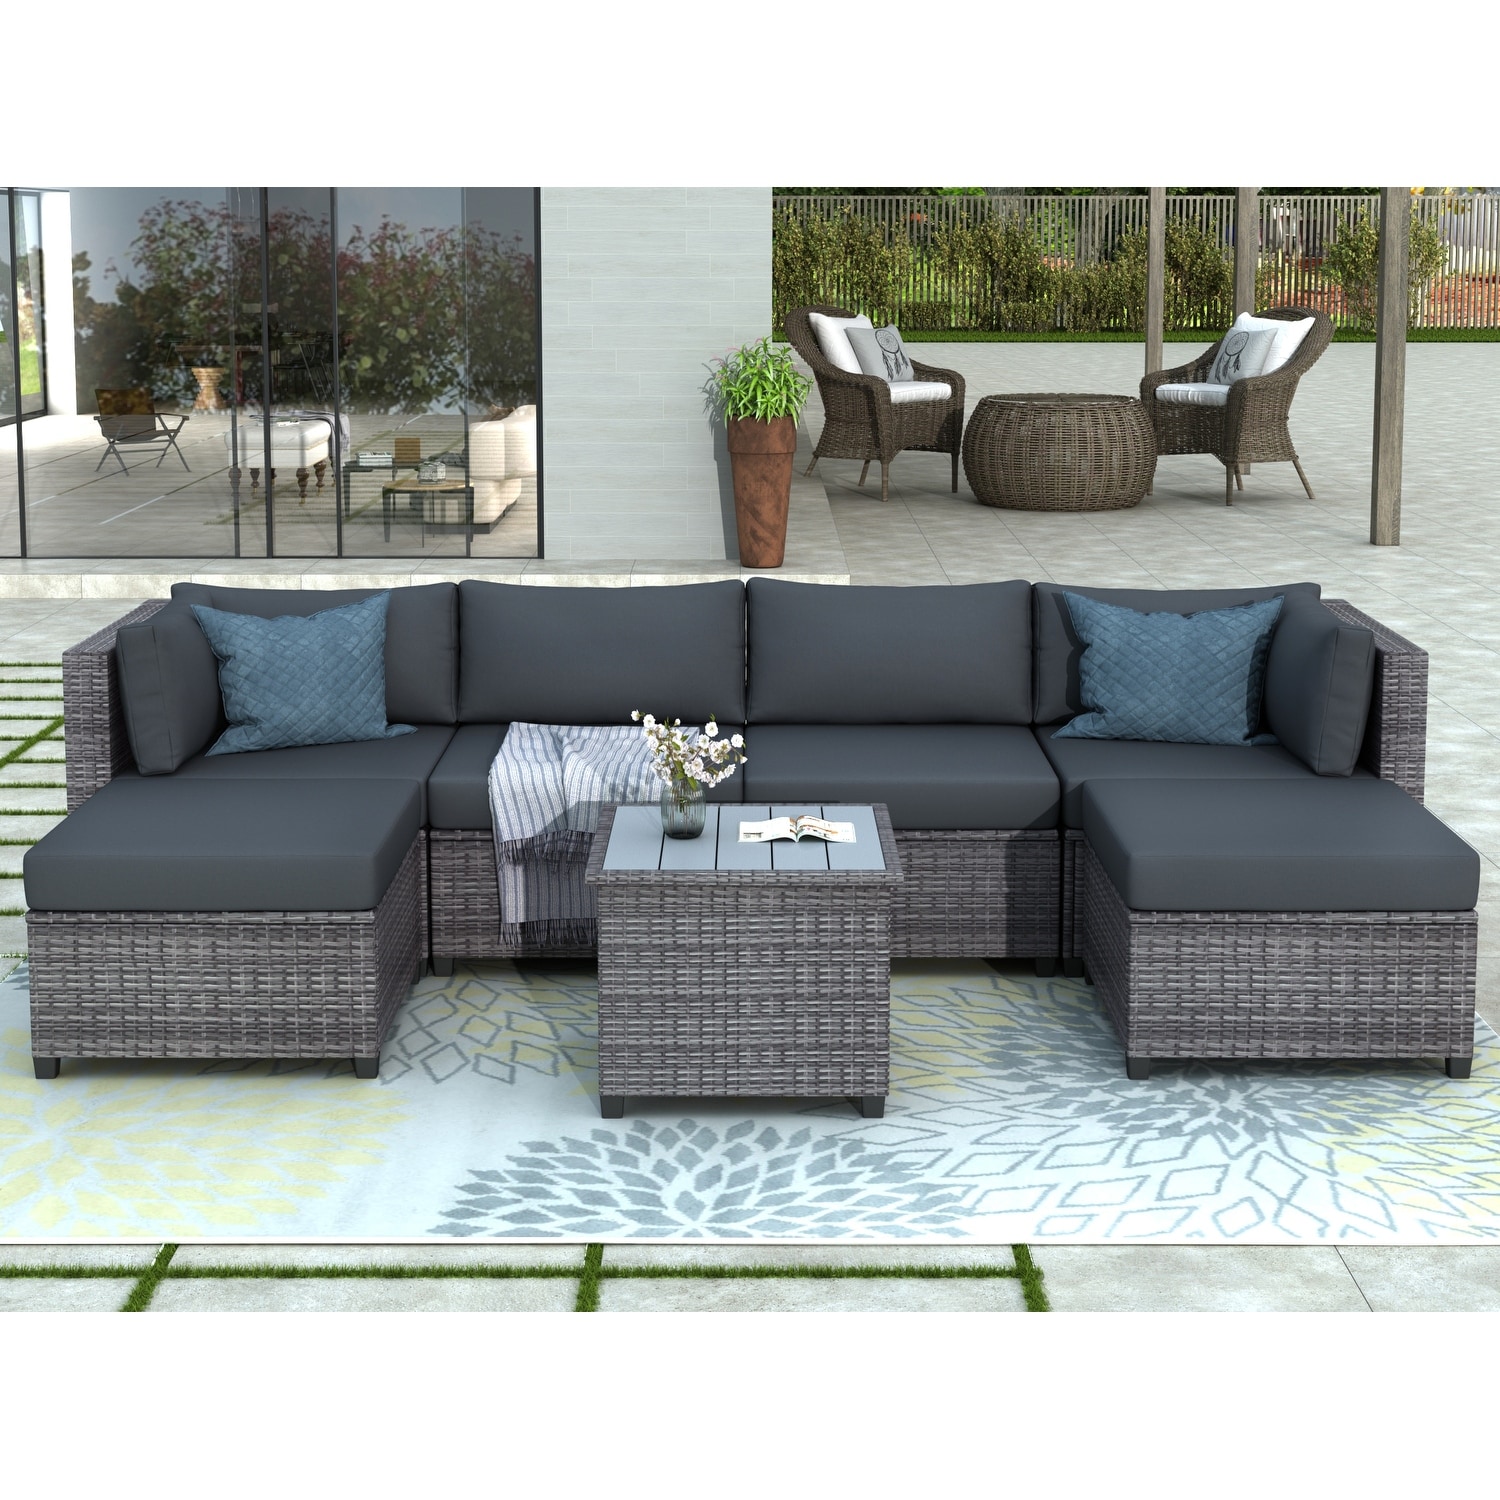 7 Piece Rattan Sectional Seating Group With Cushions